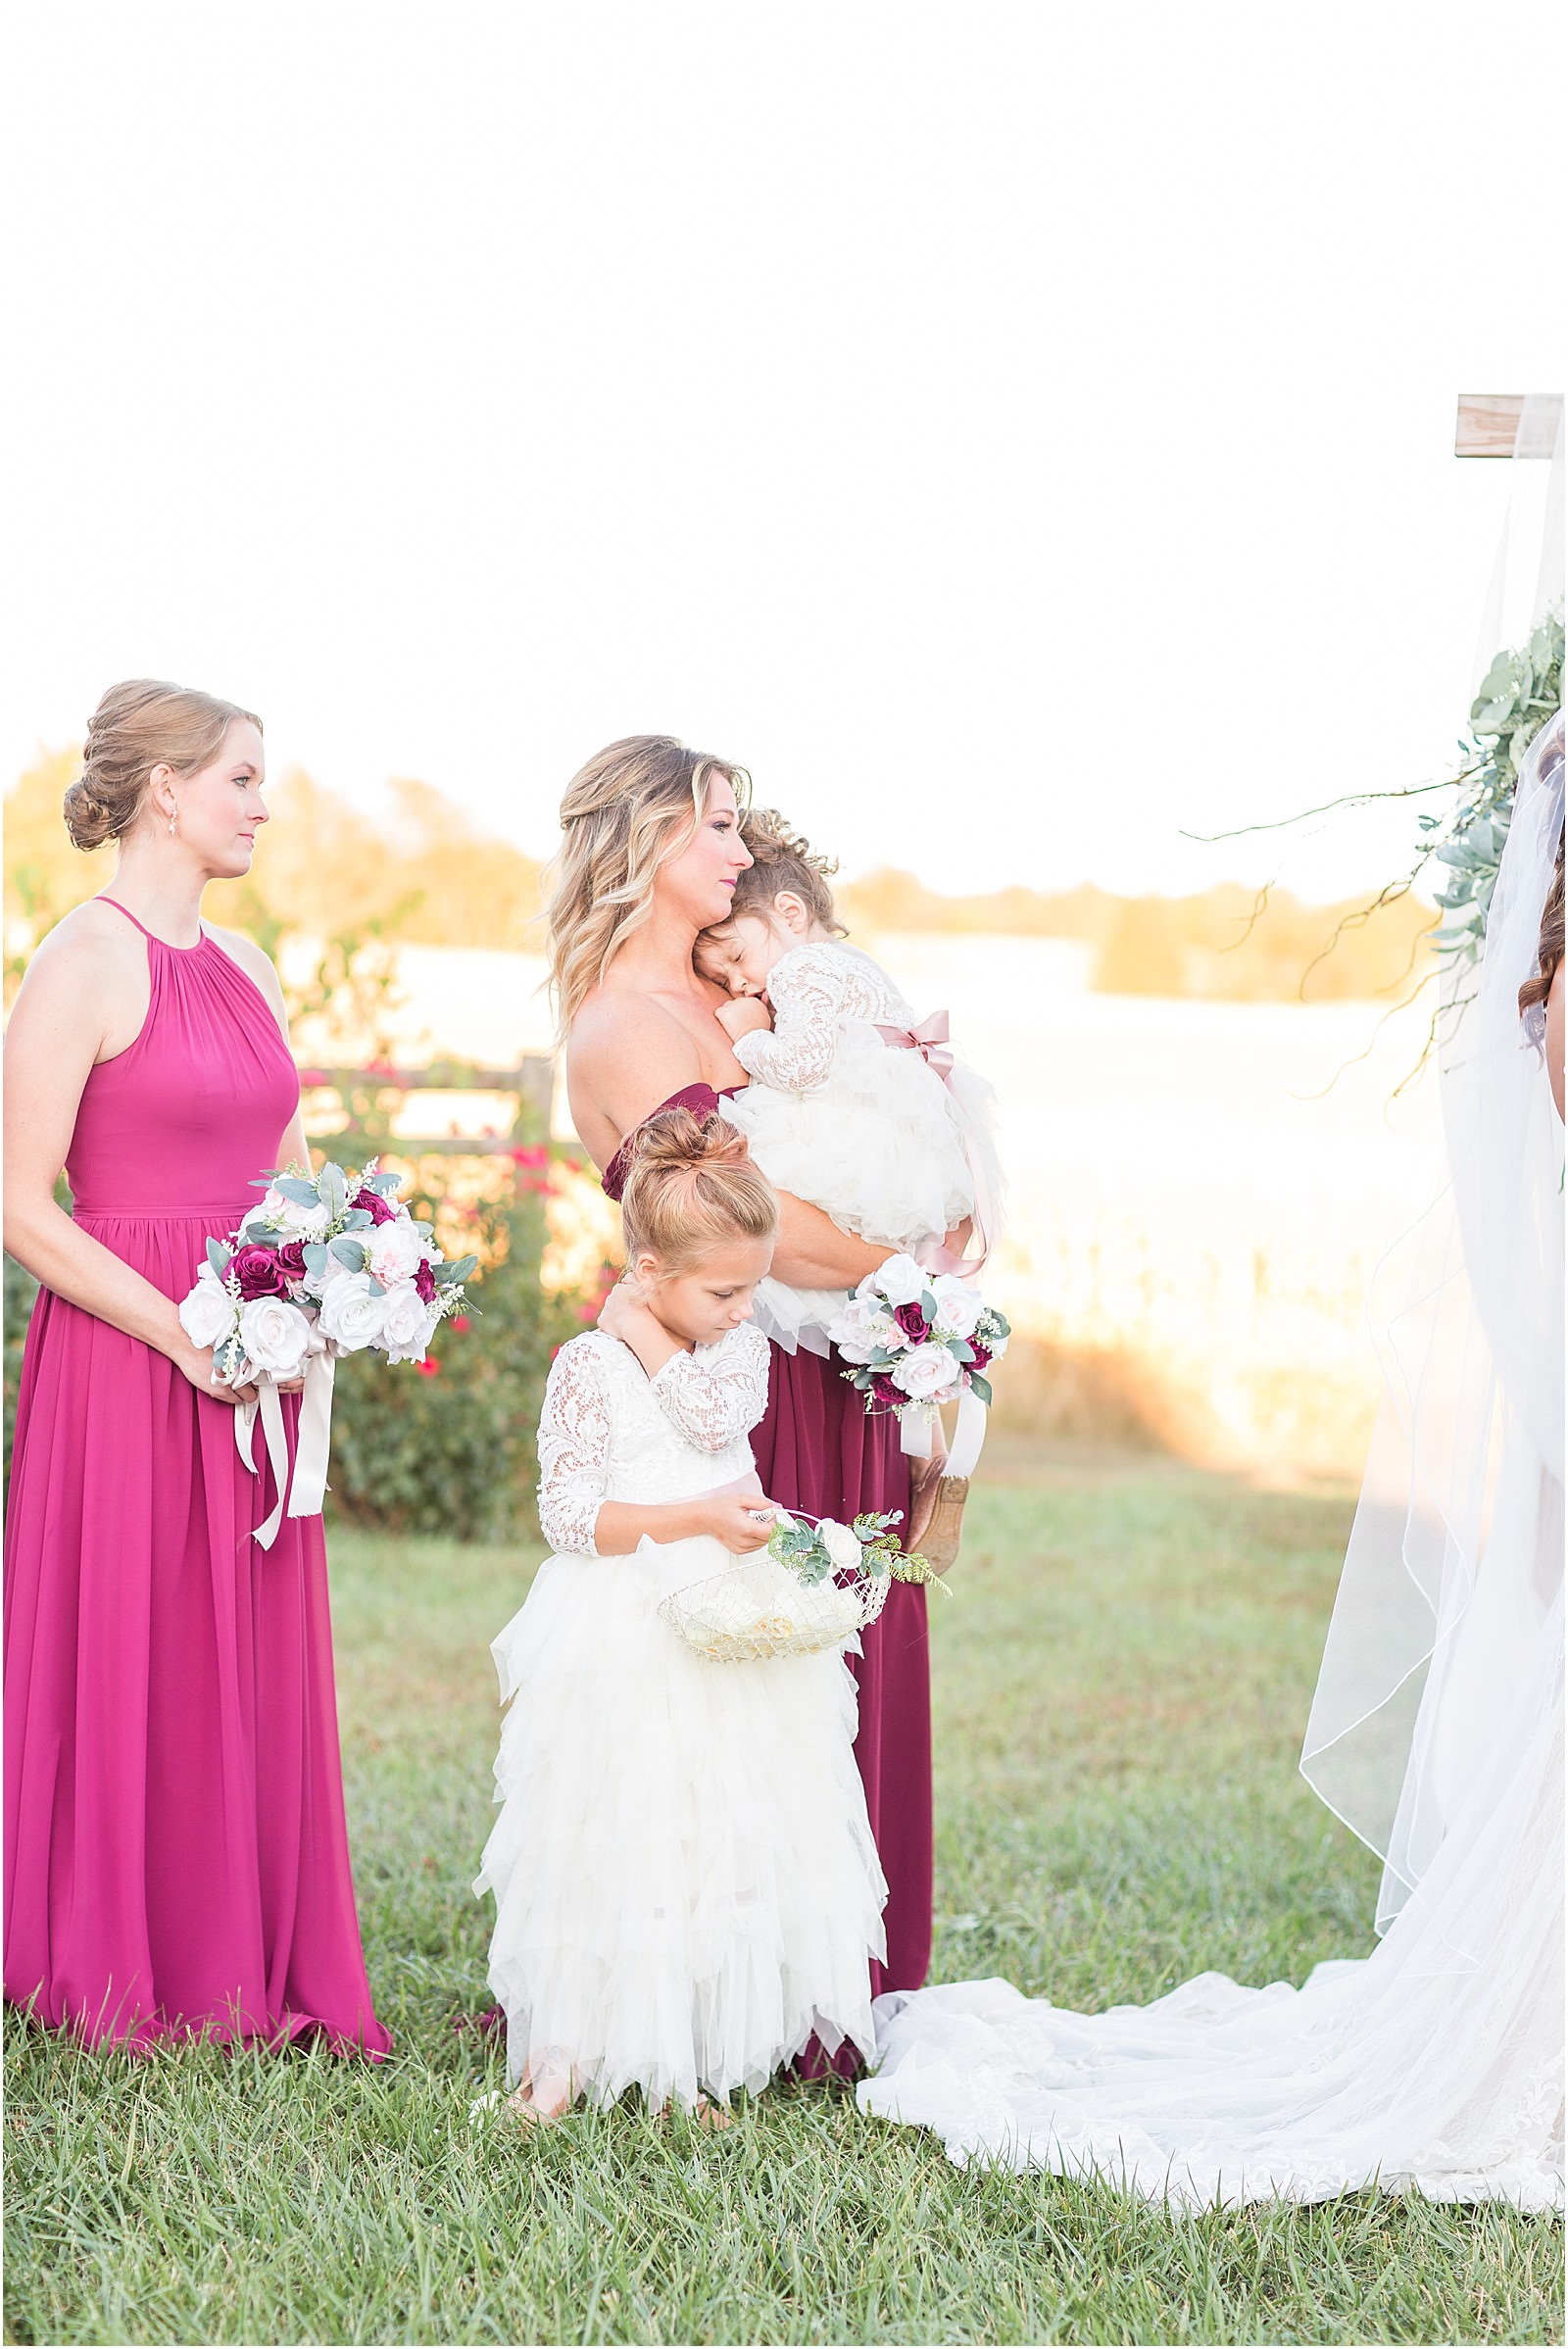 A Farmer and Frenchman Wedding | Laura and Ryan | Bret and Brandie Photography0119.jpg